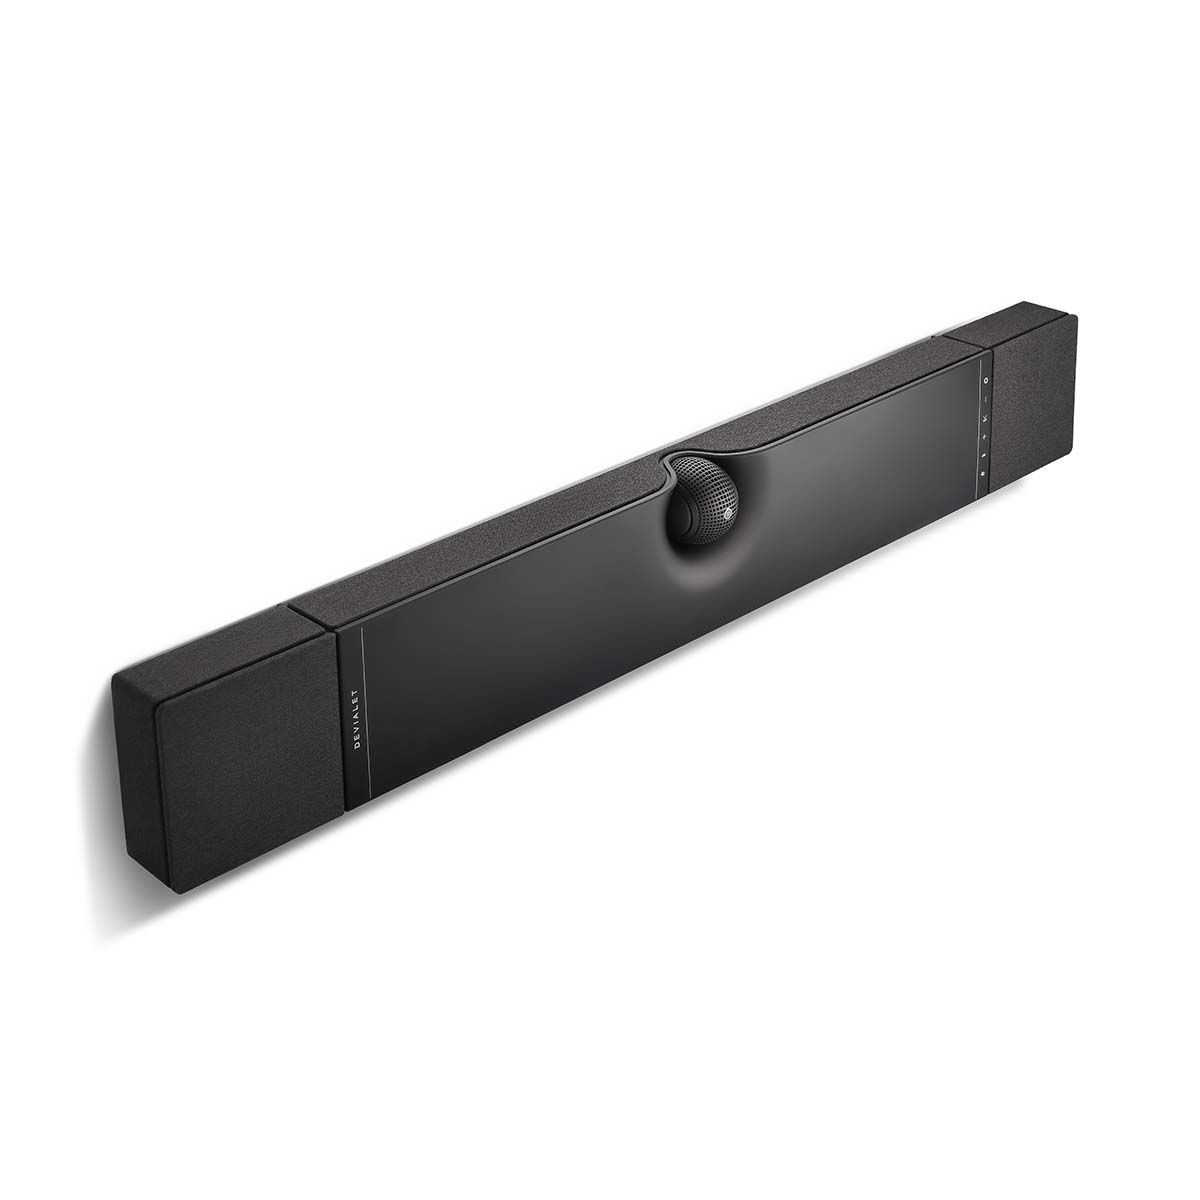 Devialet Dione Dolby Atmos Soundbar, angled view in vertical configuration